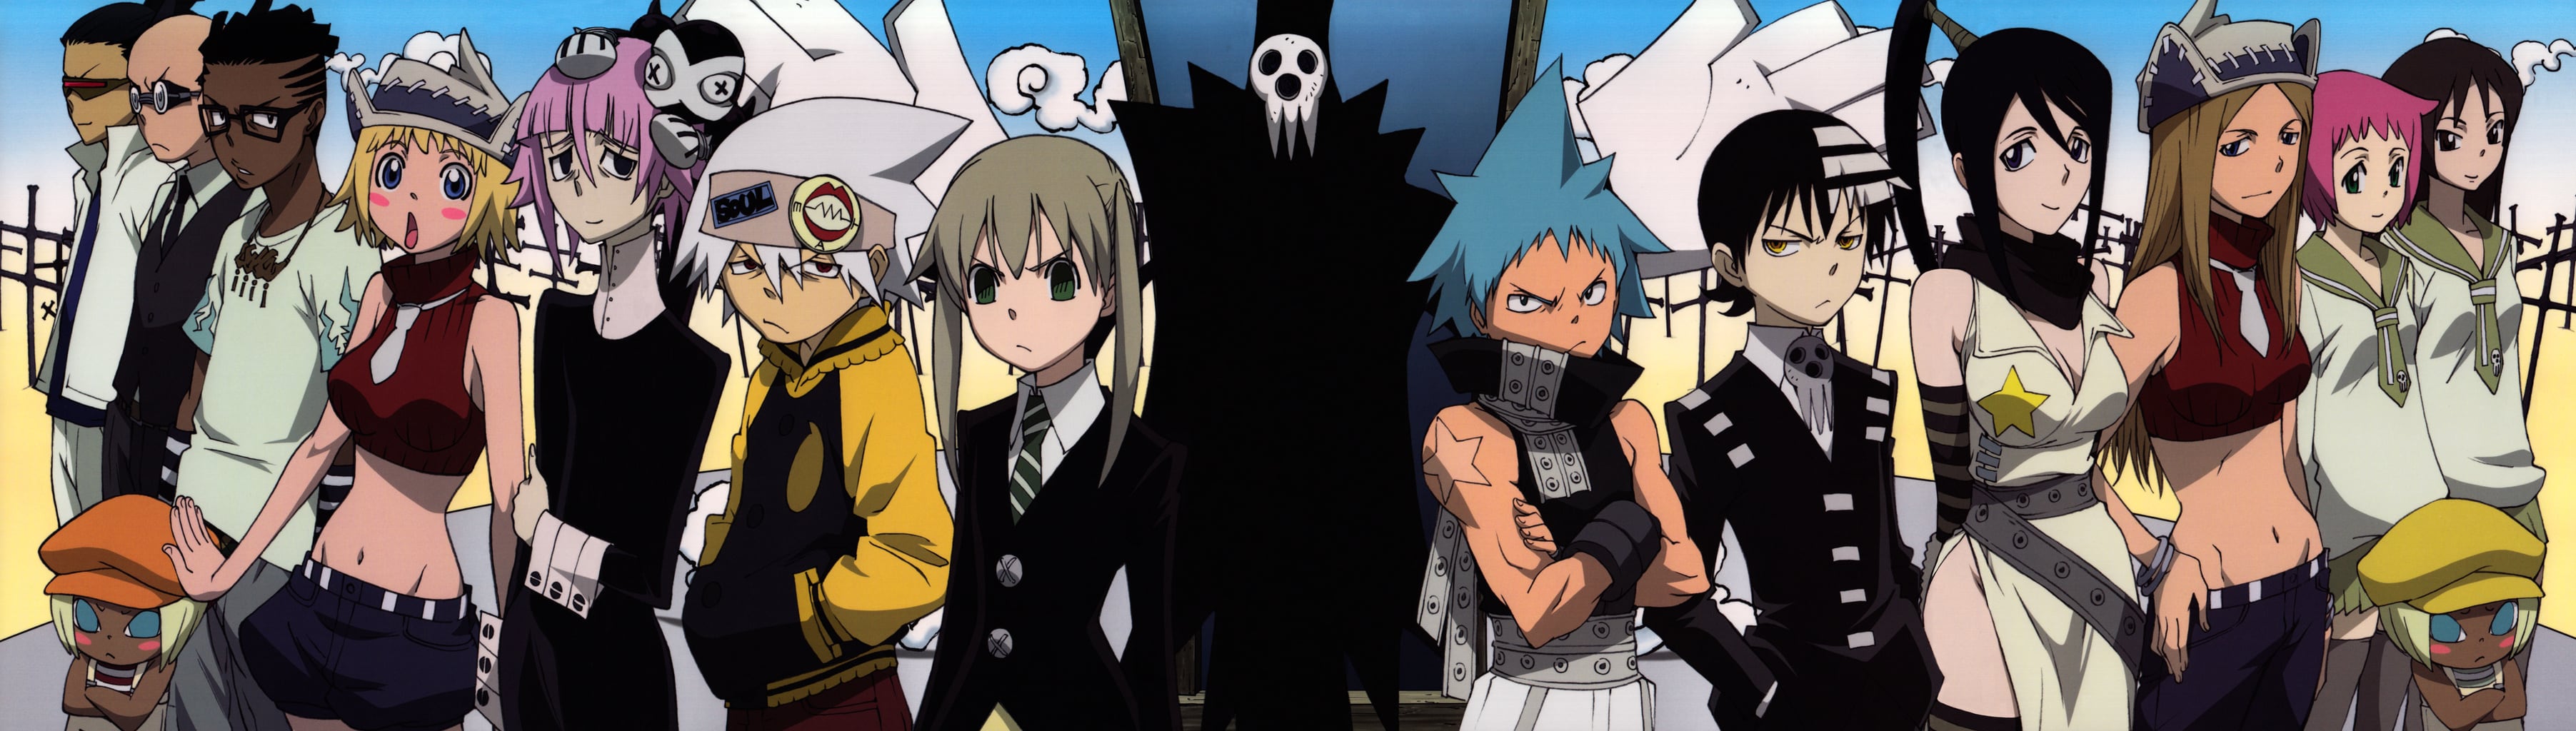 soul eater souls and characters  The imagination anime club Photo  39025110  Fanpop